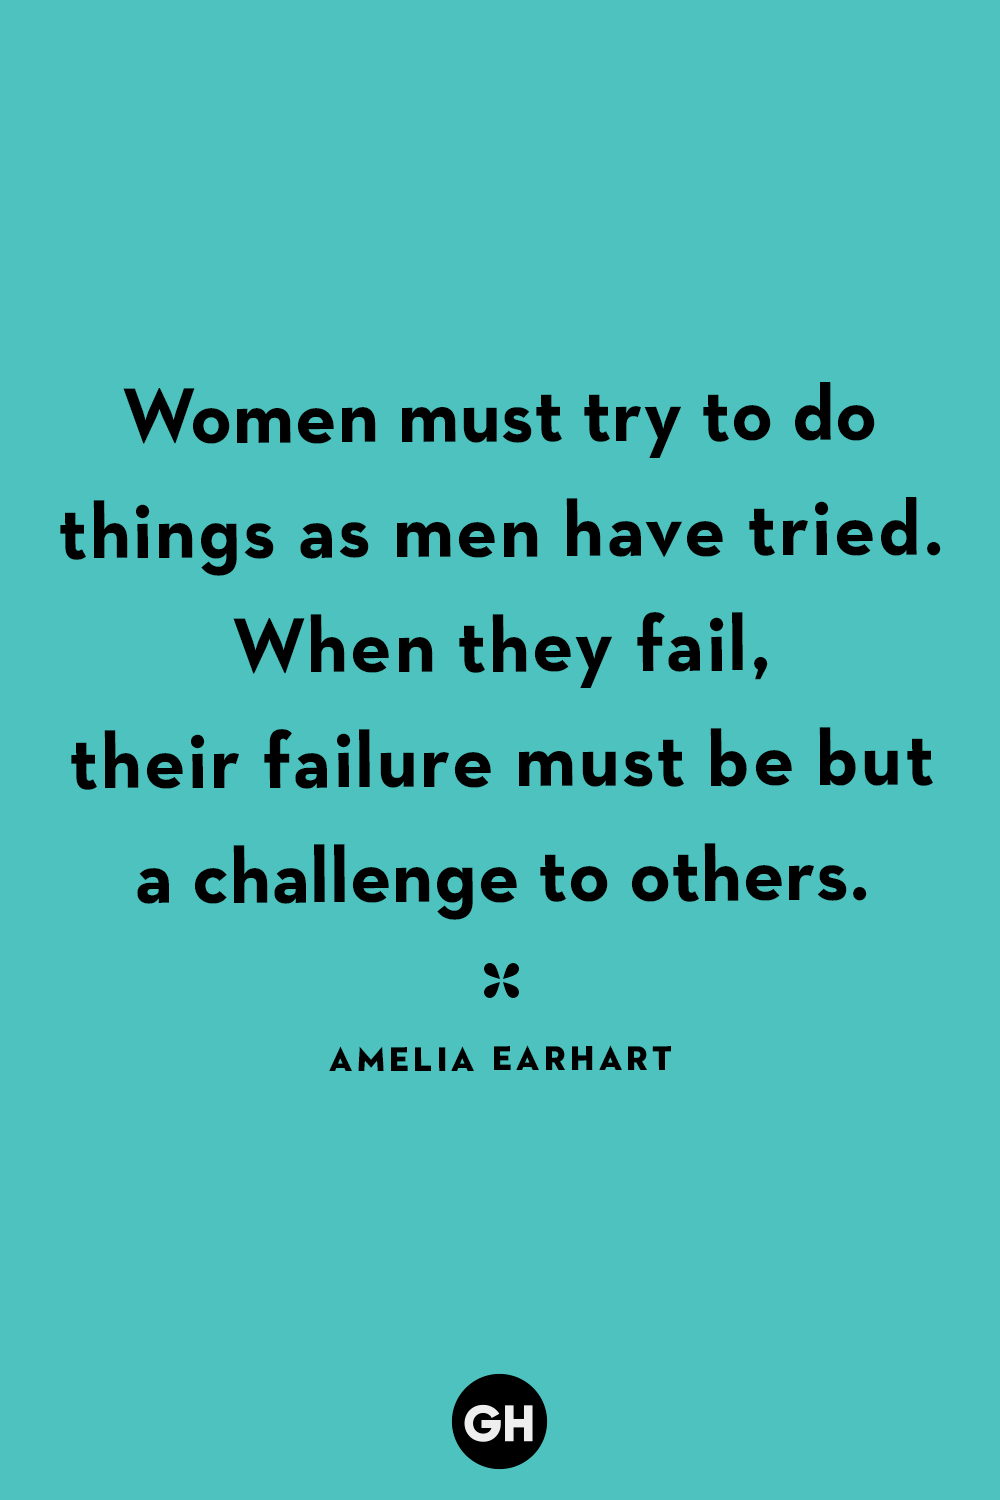 powerful women quotes